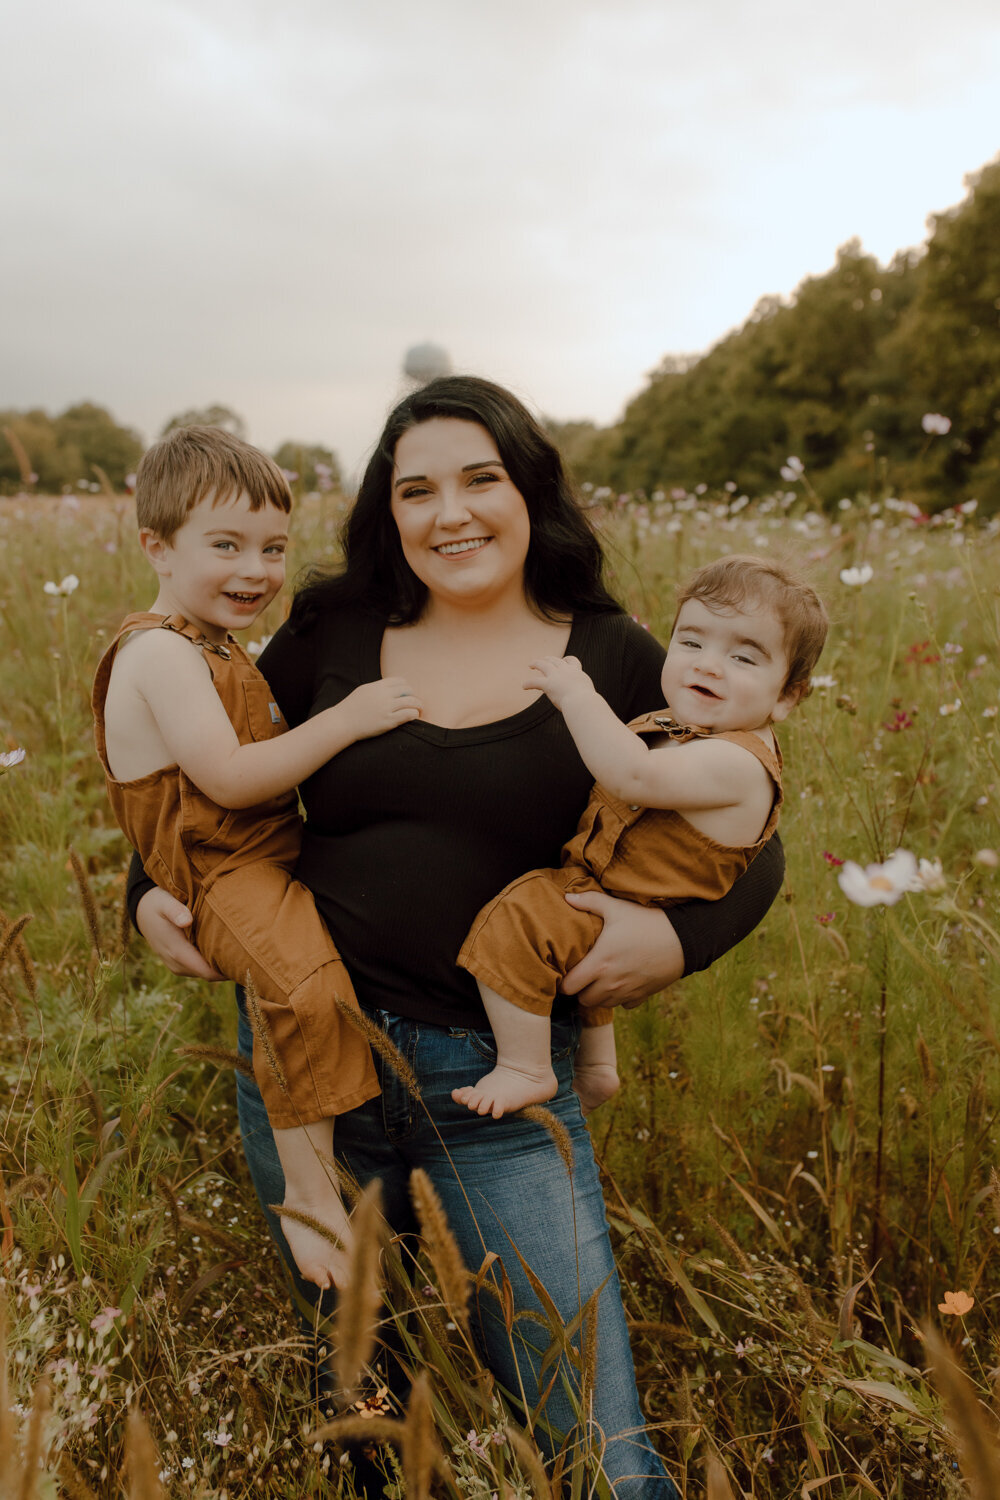 A Pair of Perry's Photography, Winchester KY Family Photographer